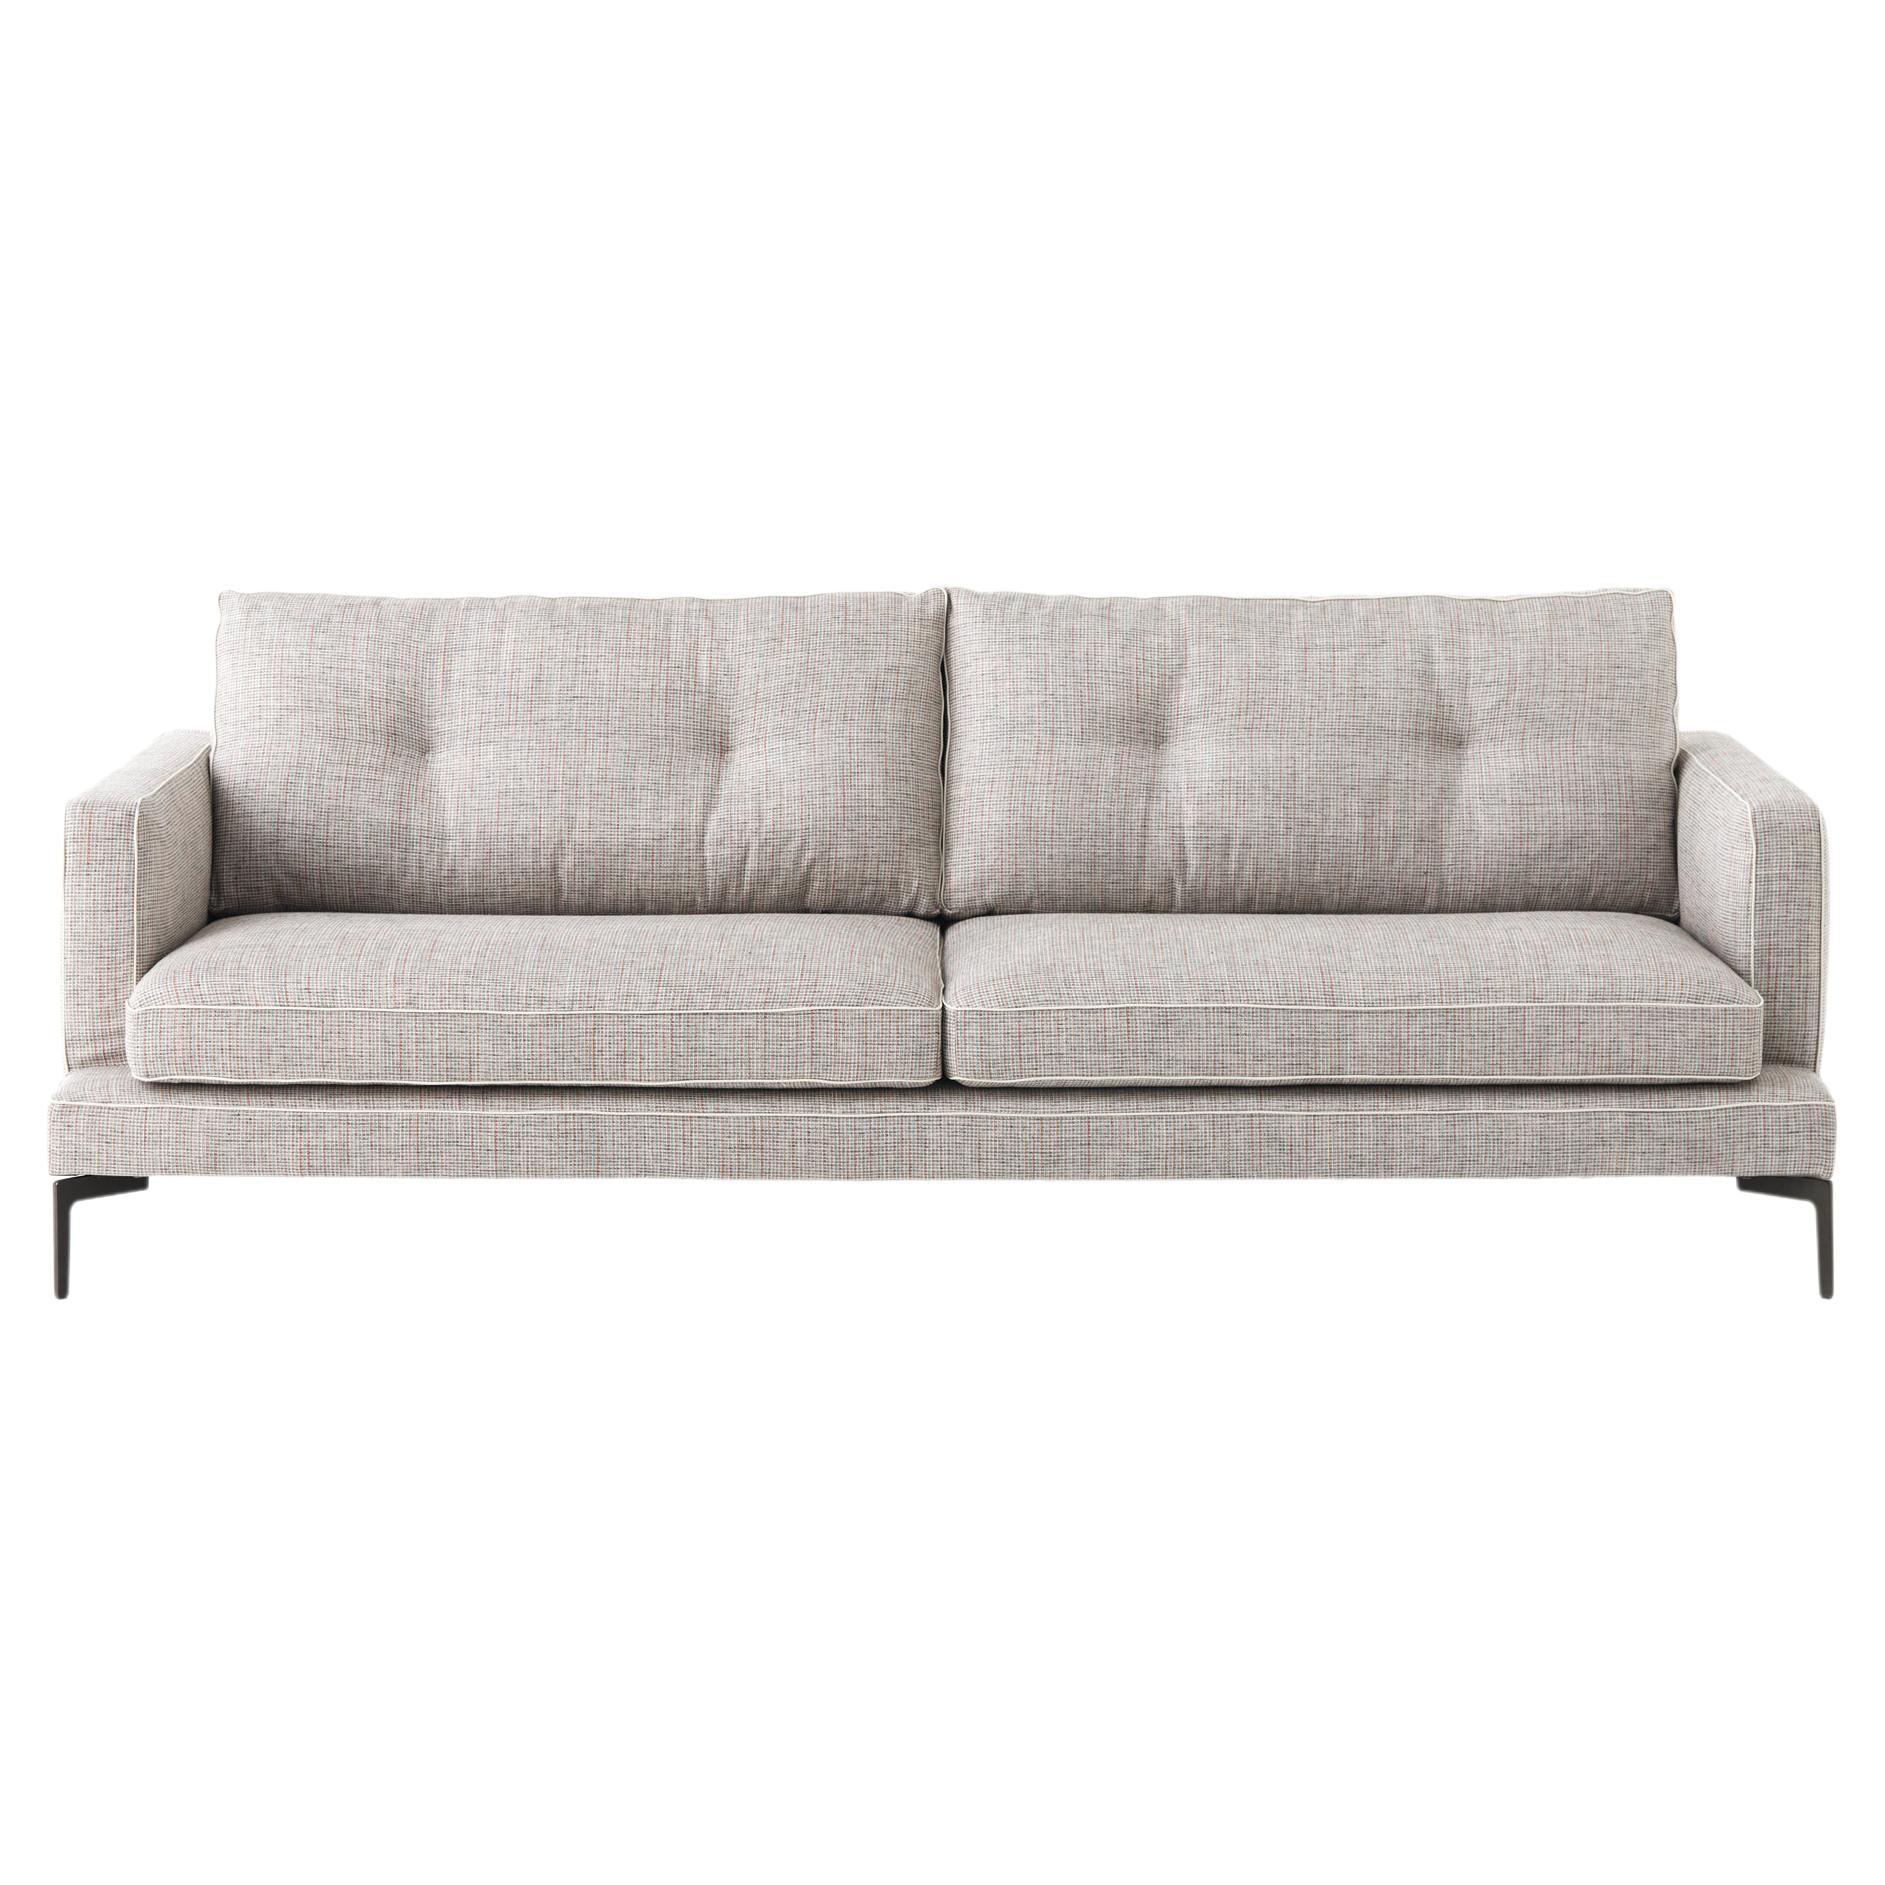 Essentiel 2-Seat 154 Sofa in Vip Beige Upholstery & Grey Legs by Sergio Bicego For Sale